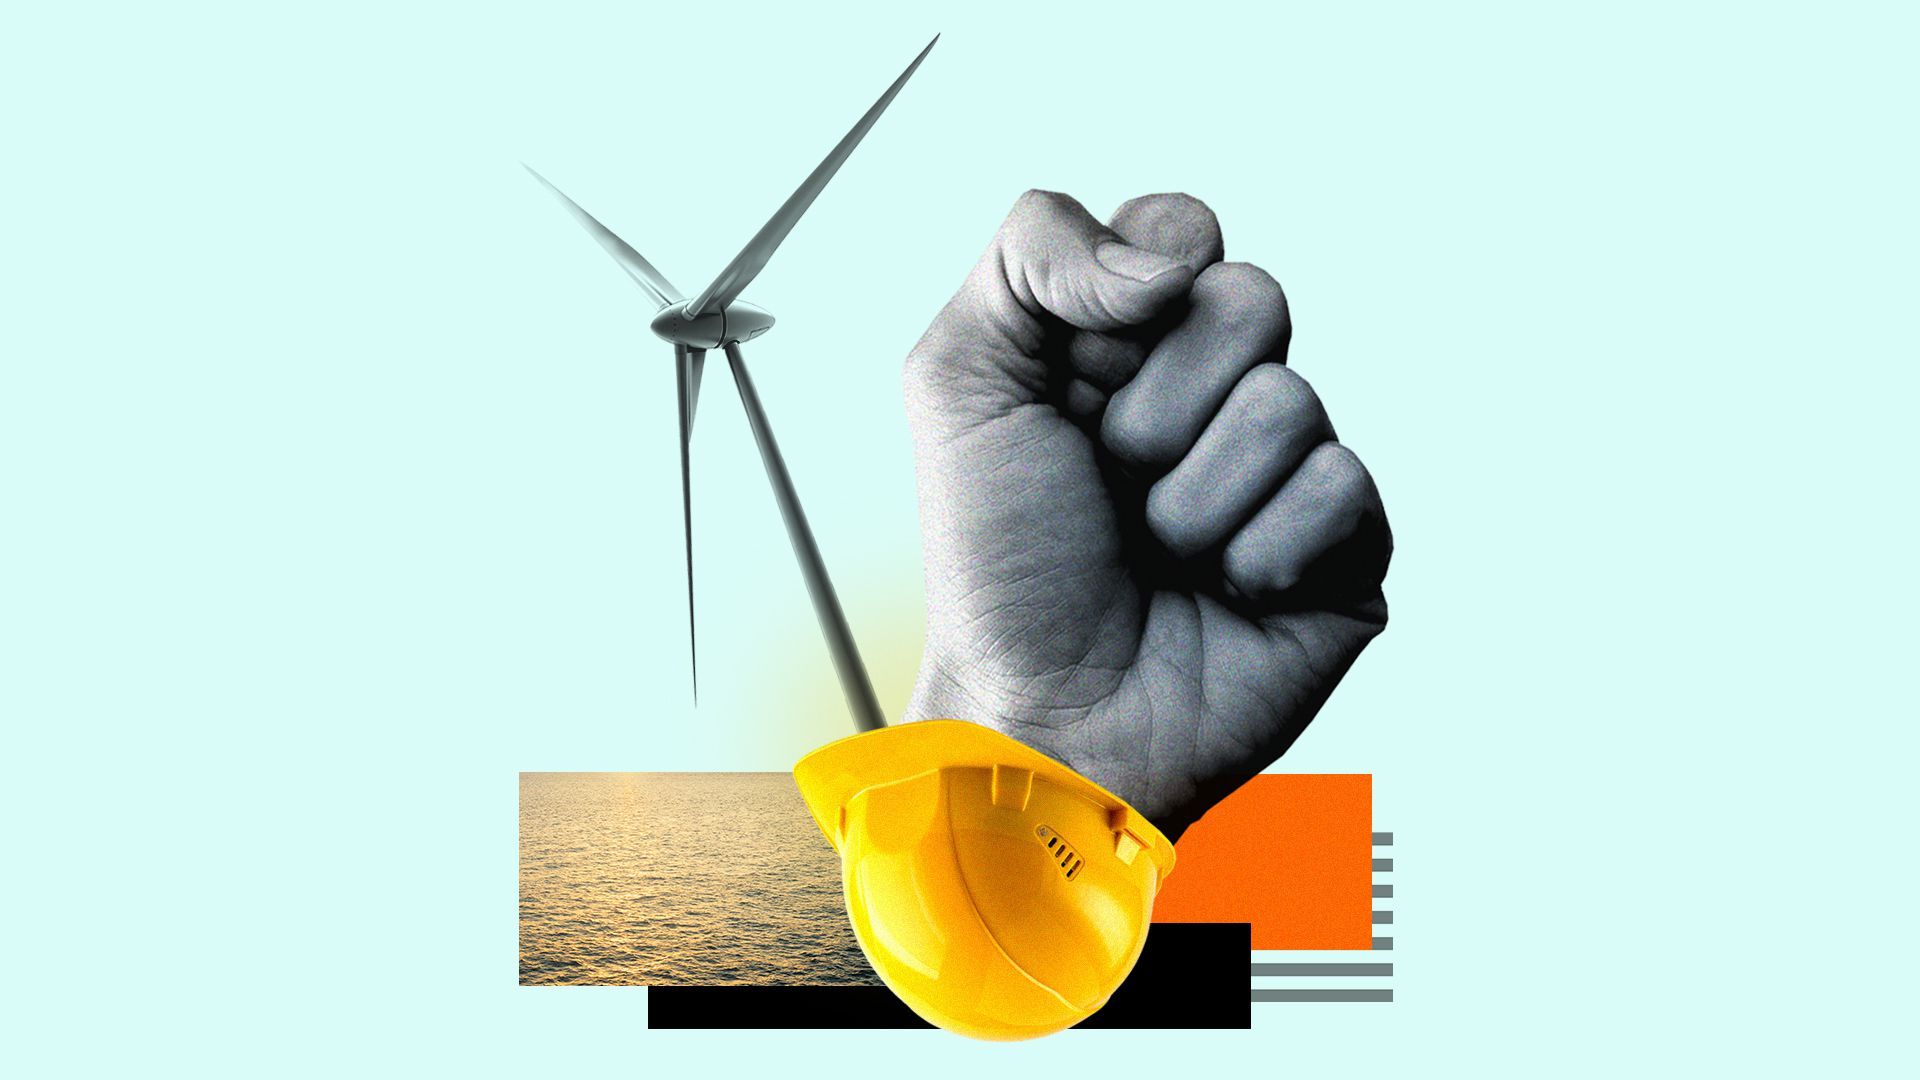 Illustration collage of a fist, wind turbine, hard hat, and ocean.